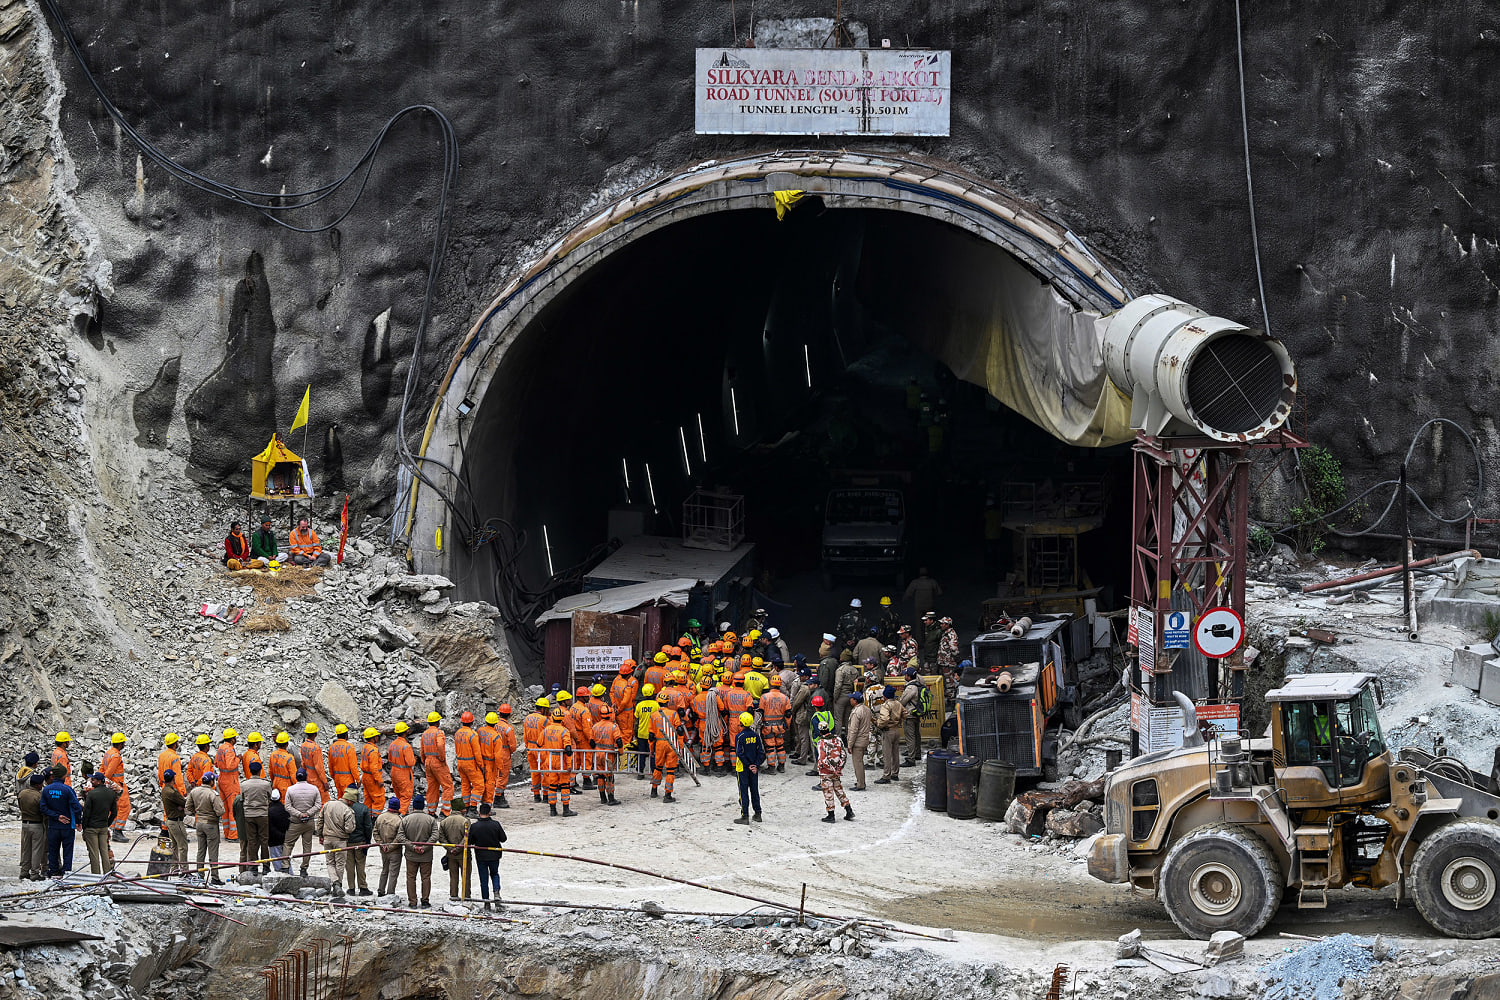 Indian rescuers drill through debris to reach 41 men trapped in tunnel